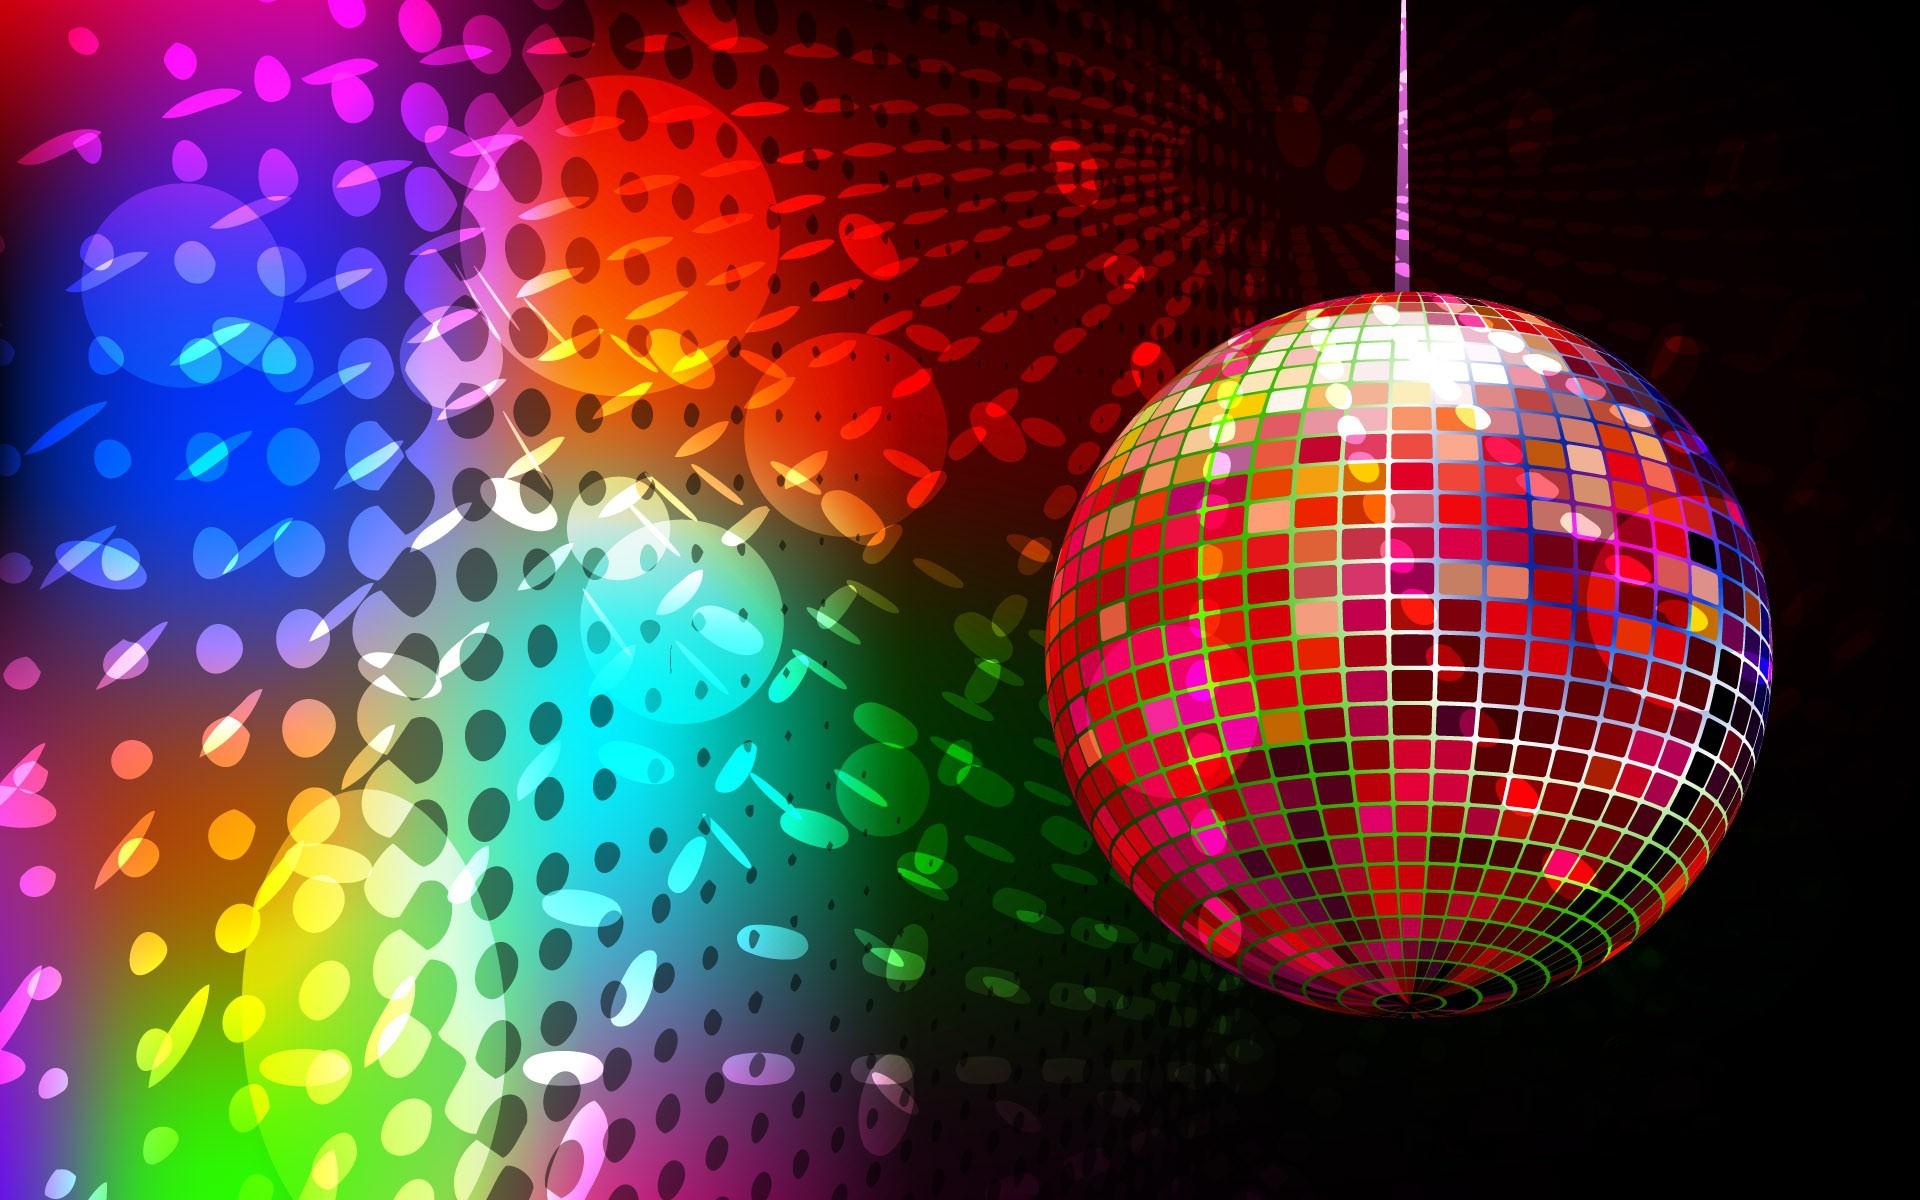 Discotheque: A distinctive vibe, A suspended rotating mirrored sphere, Rainbow glittering ball. 1920x1200 HD Wallpaper.